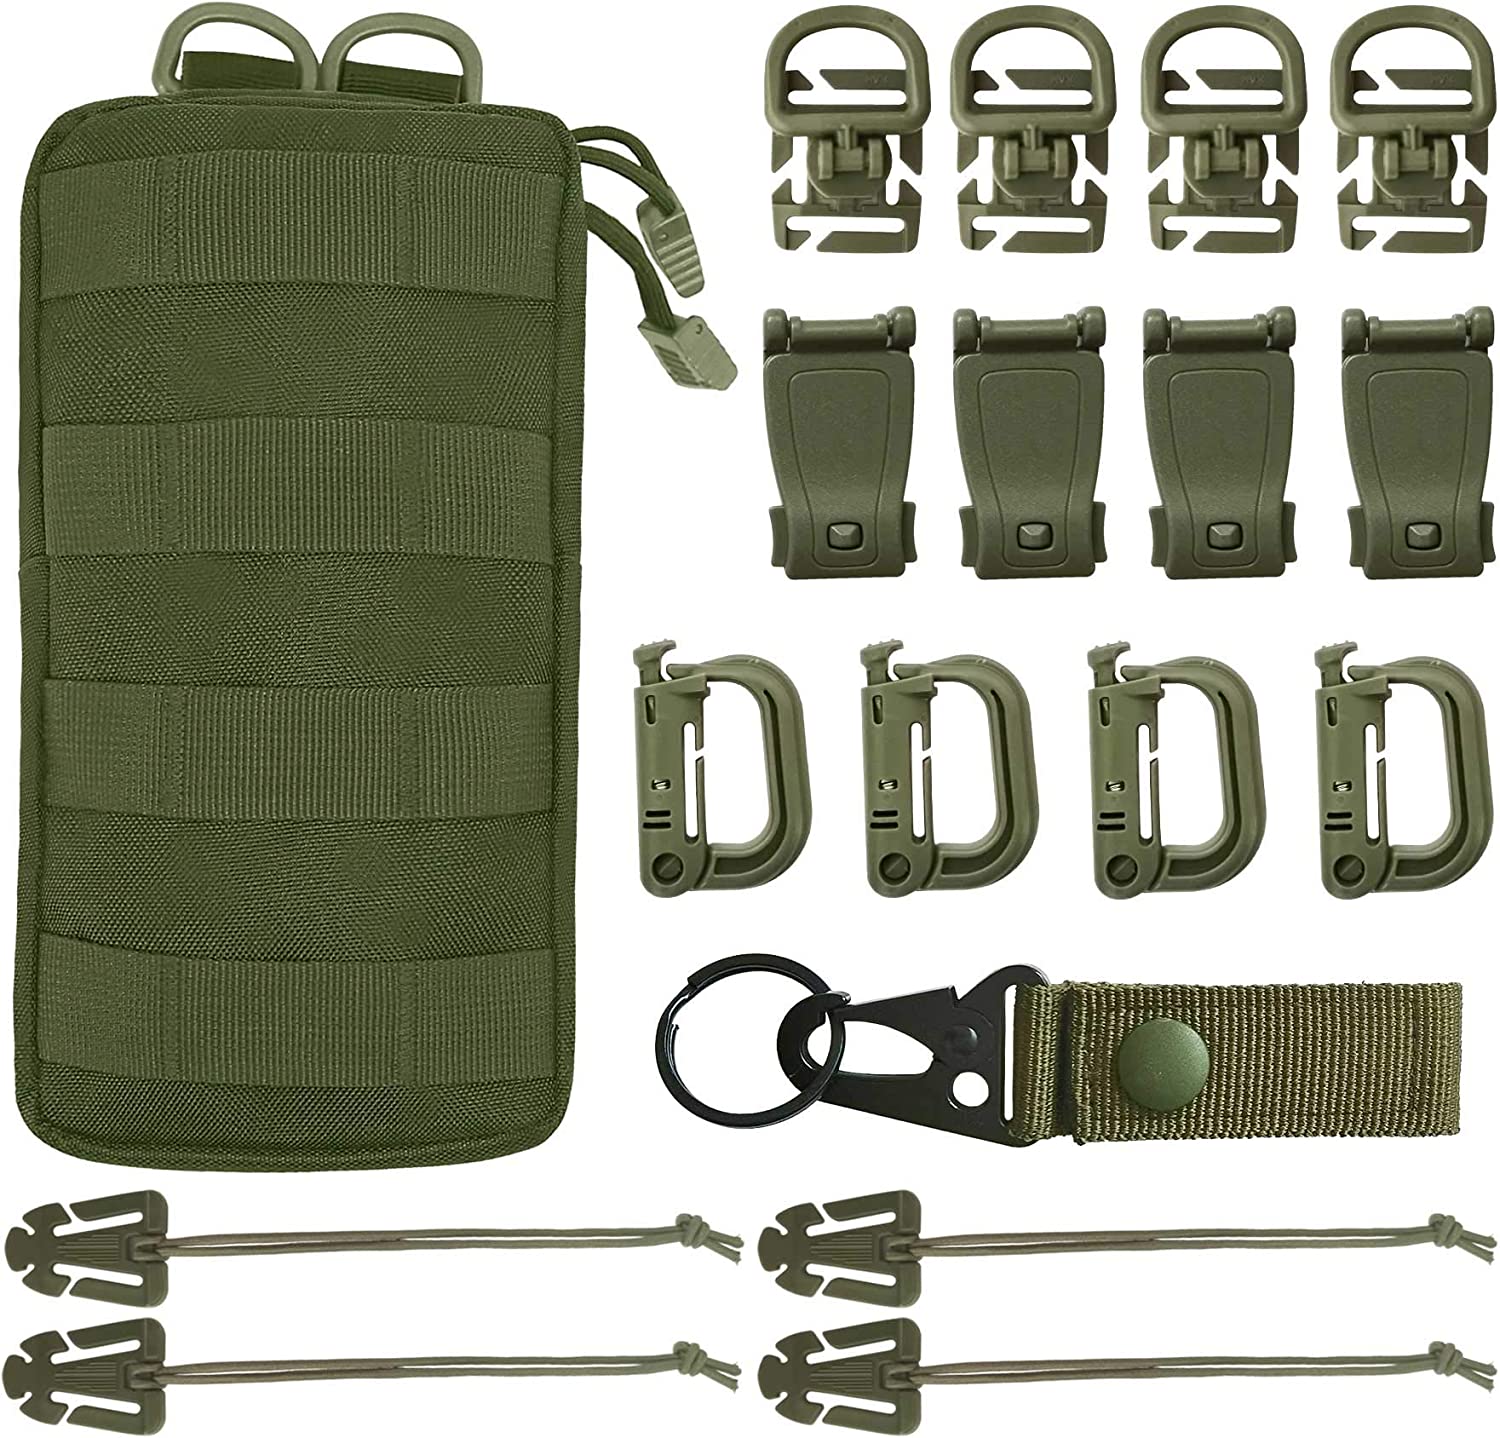 MGFLASHFORCE Kit of 18 Molle Accessories, Molle Attachments Clips and Straps with Pouch for 1” Webbing Tactical Backpack Tactical Vest